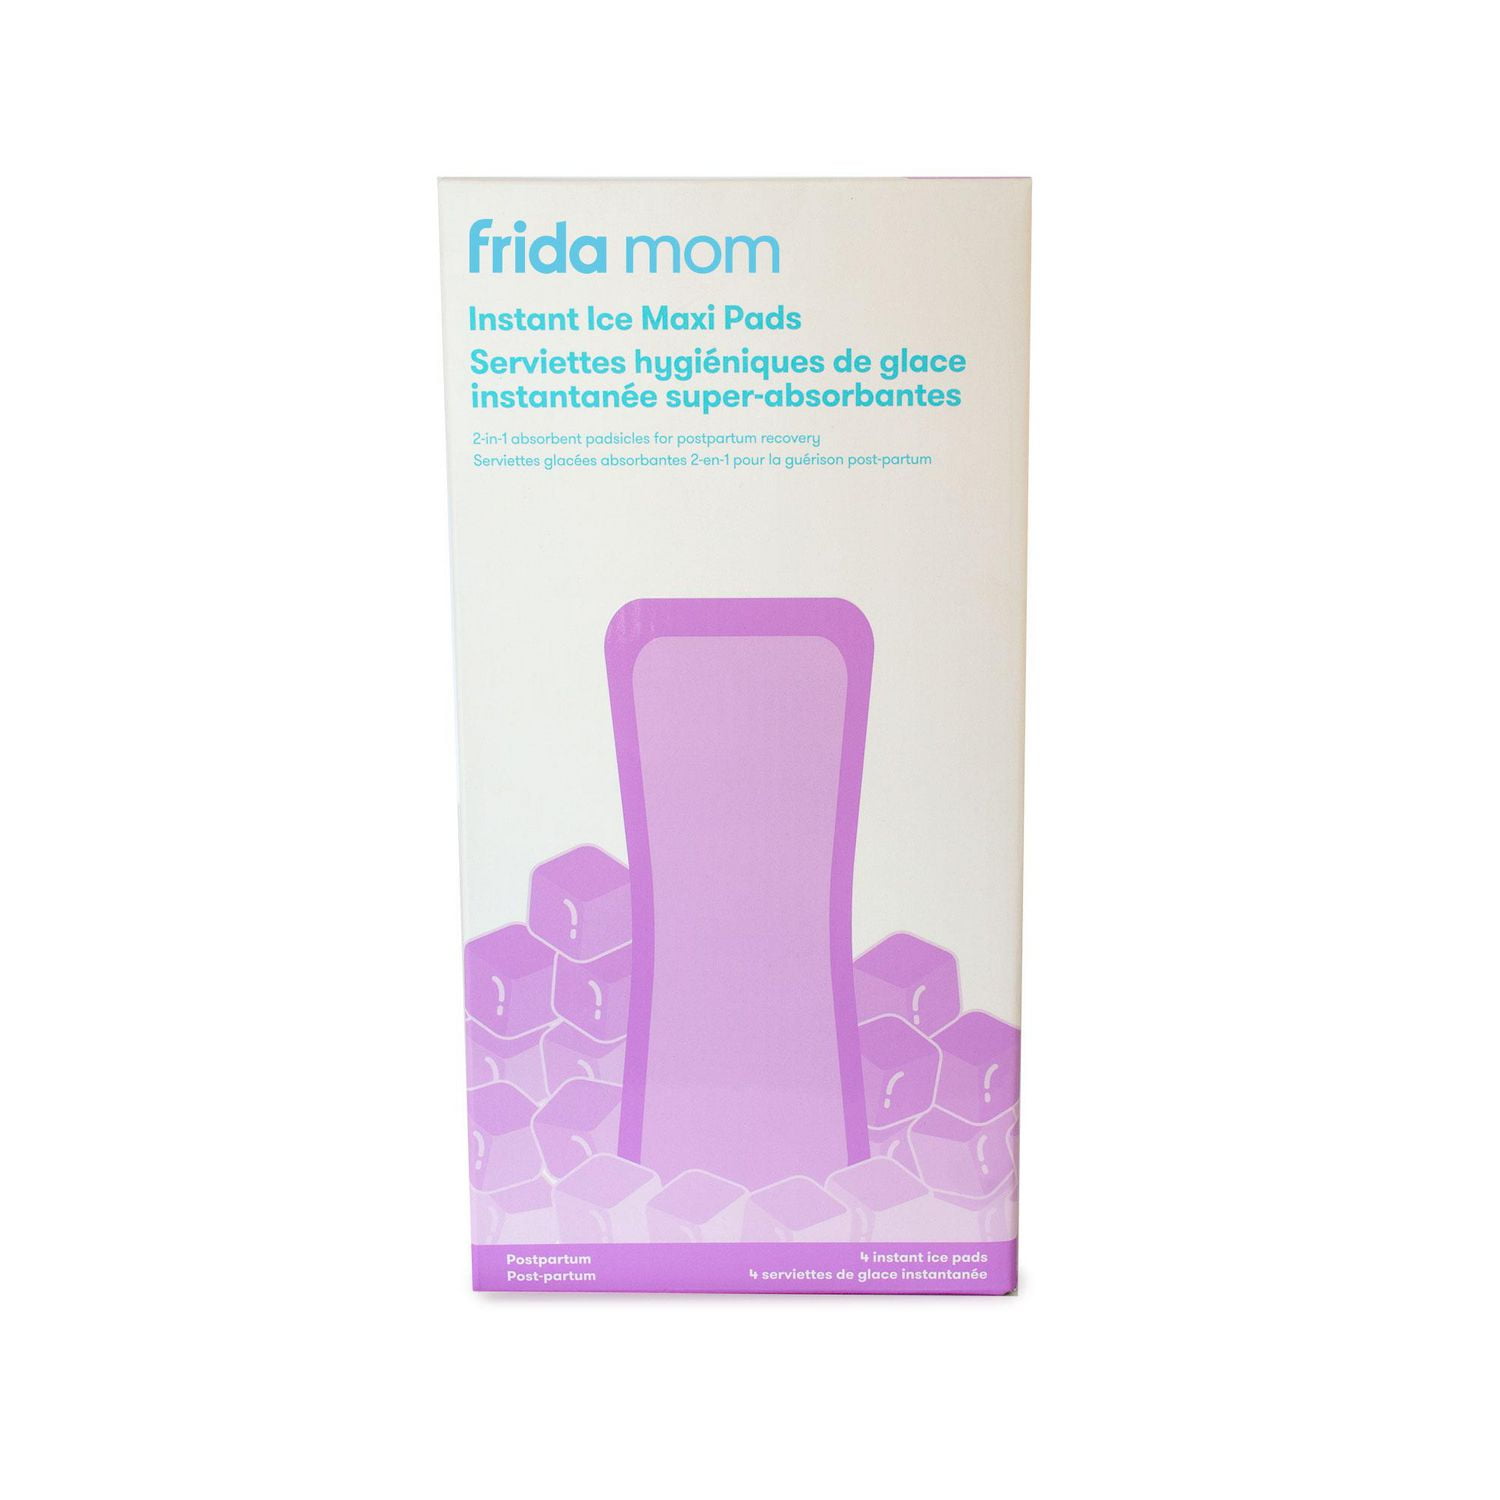 Frida Mom - Fridababy 2-in-1 Absorbent Postpartum Perineal Ice Maxi Pads -  Instant Cold Therapy Packs and Absorbent Maternity Pad in One Ready-to-use  Padsicle for After Birth - Newborn Baby Hospital Bag